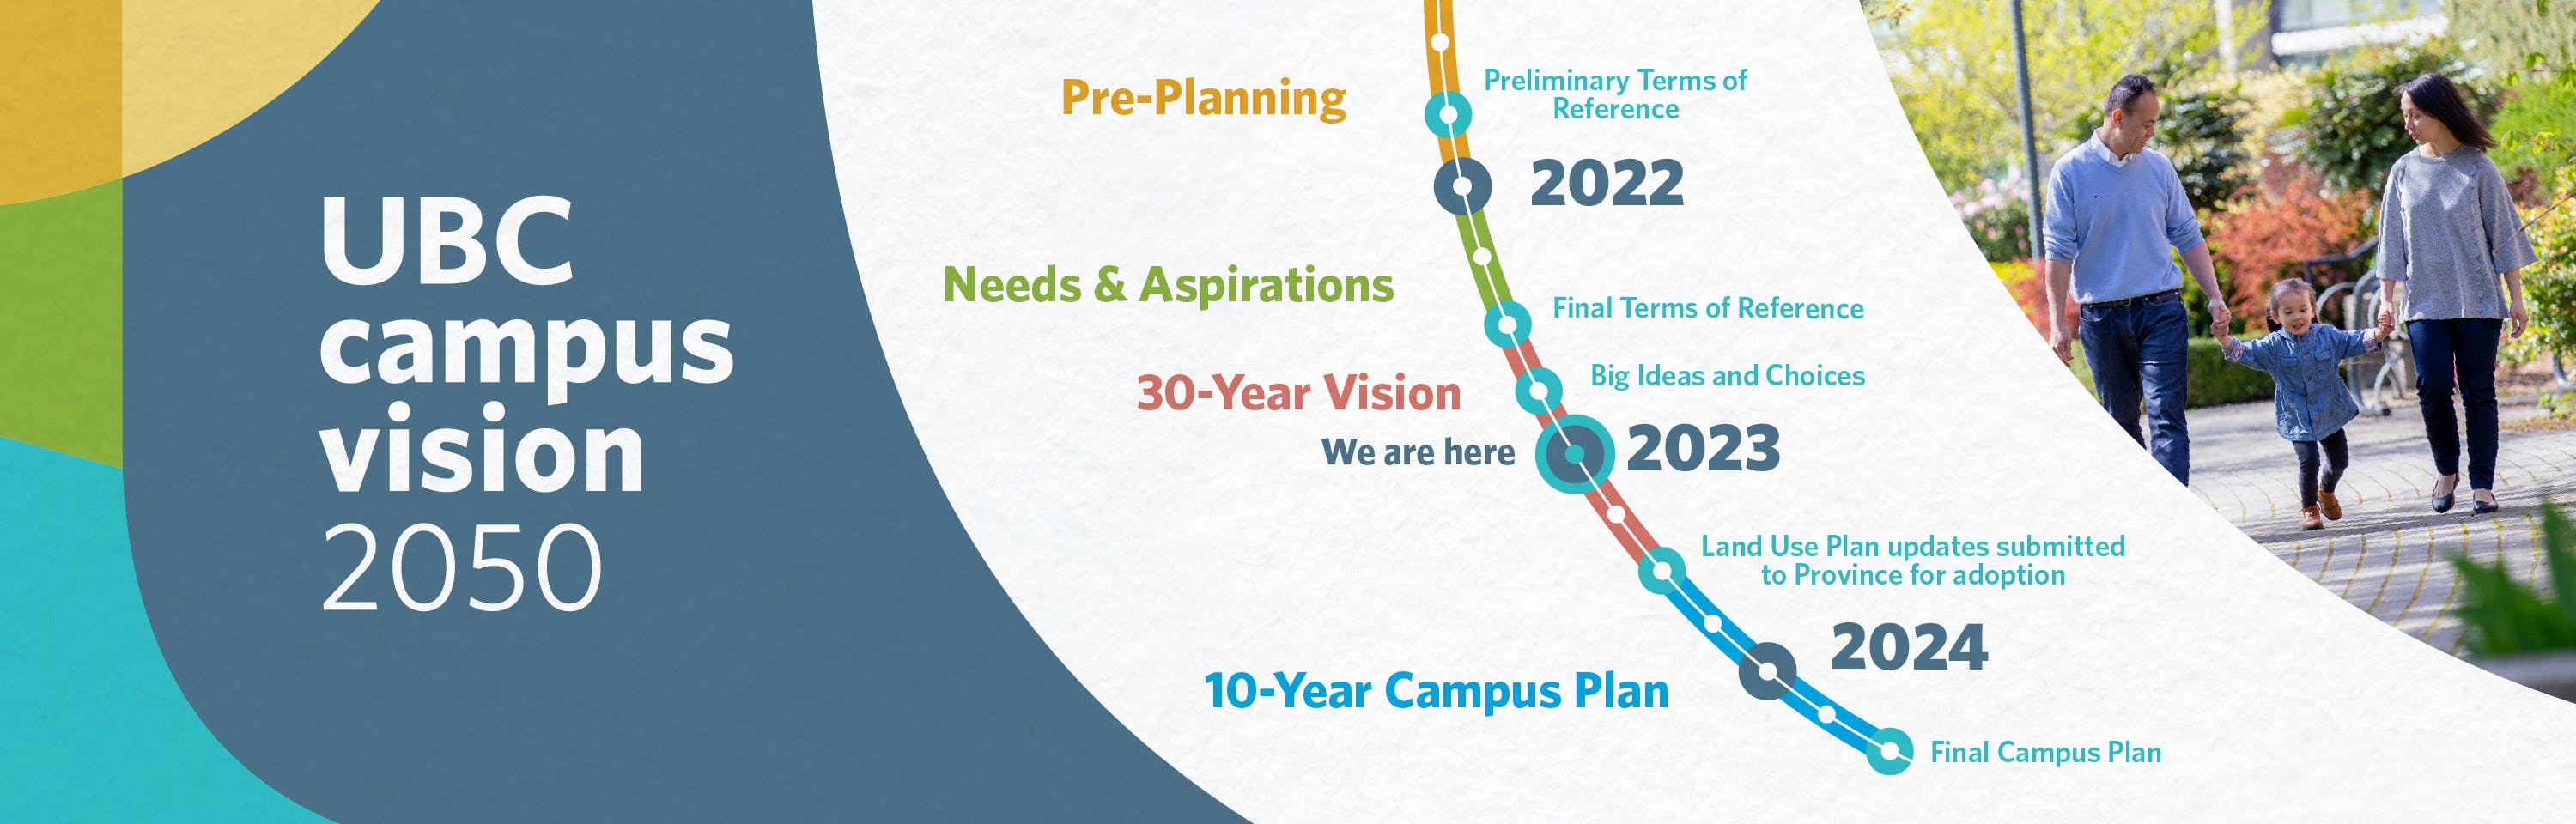 Timeline graphic that describes the Campus Vision 2050 key milestones from November 2021 to December 2024 